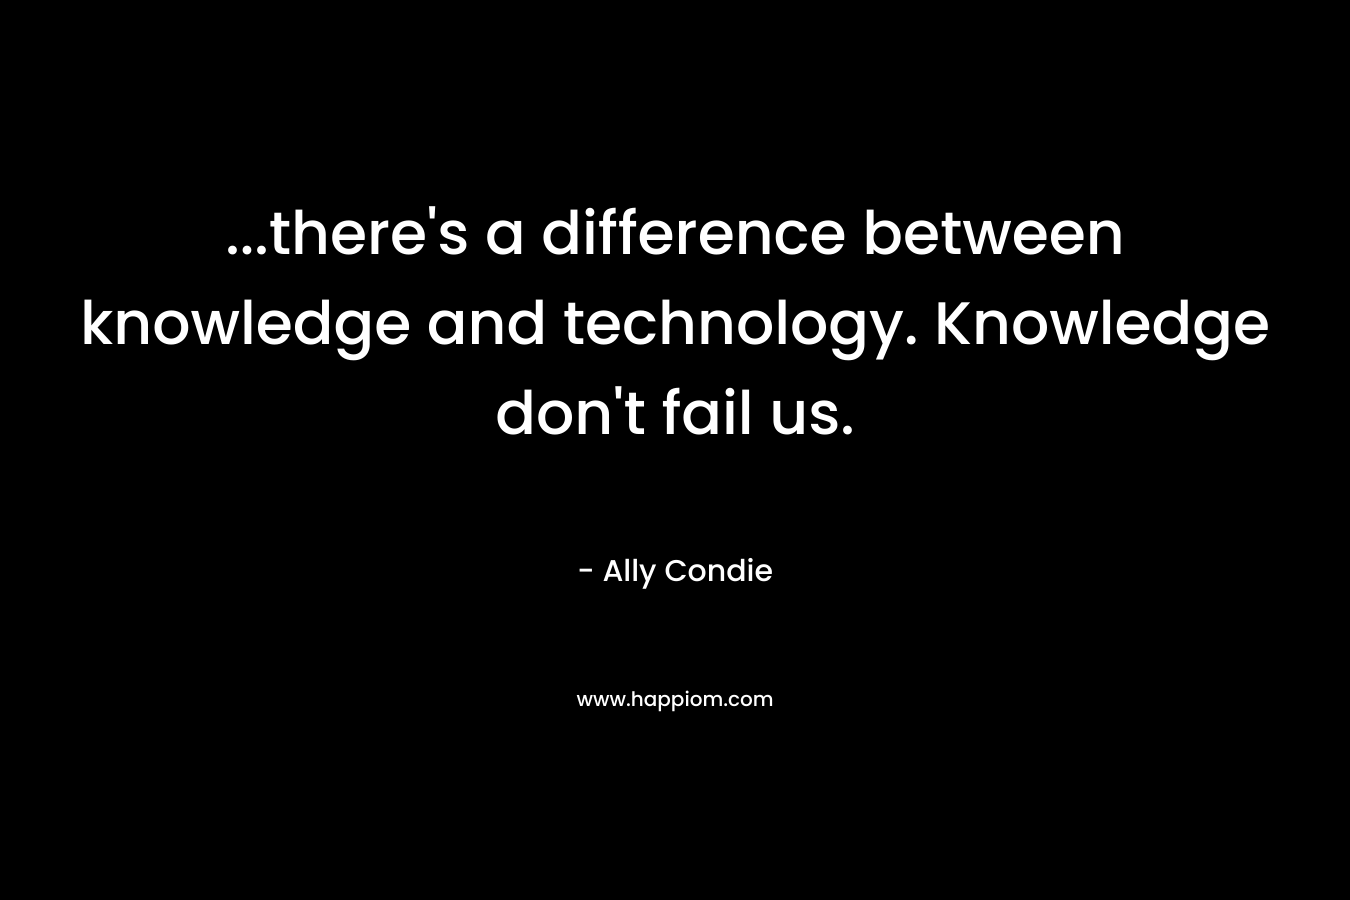 ...there's a difference between knowledge and technology. Knowledge don't fail us.